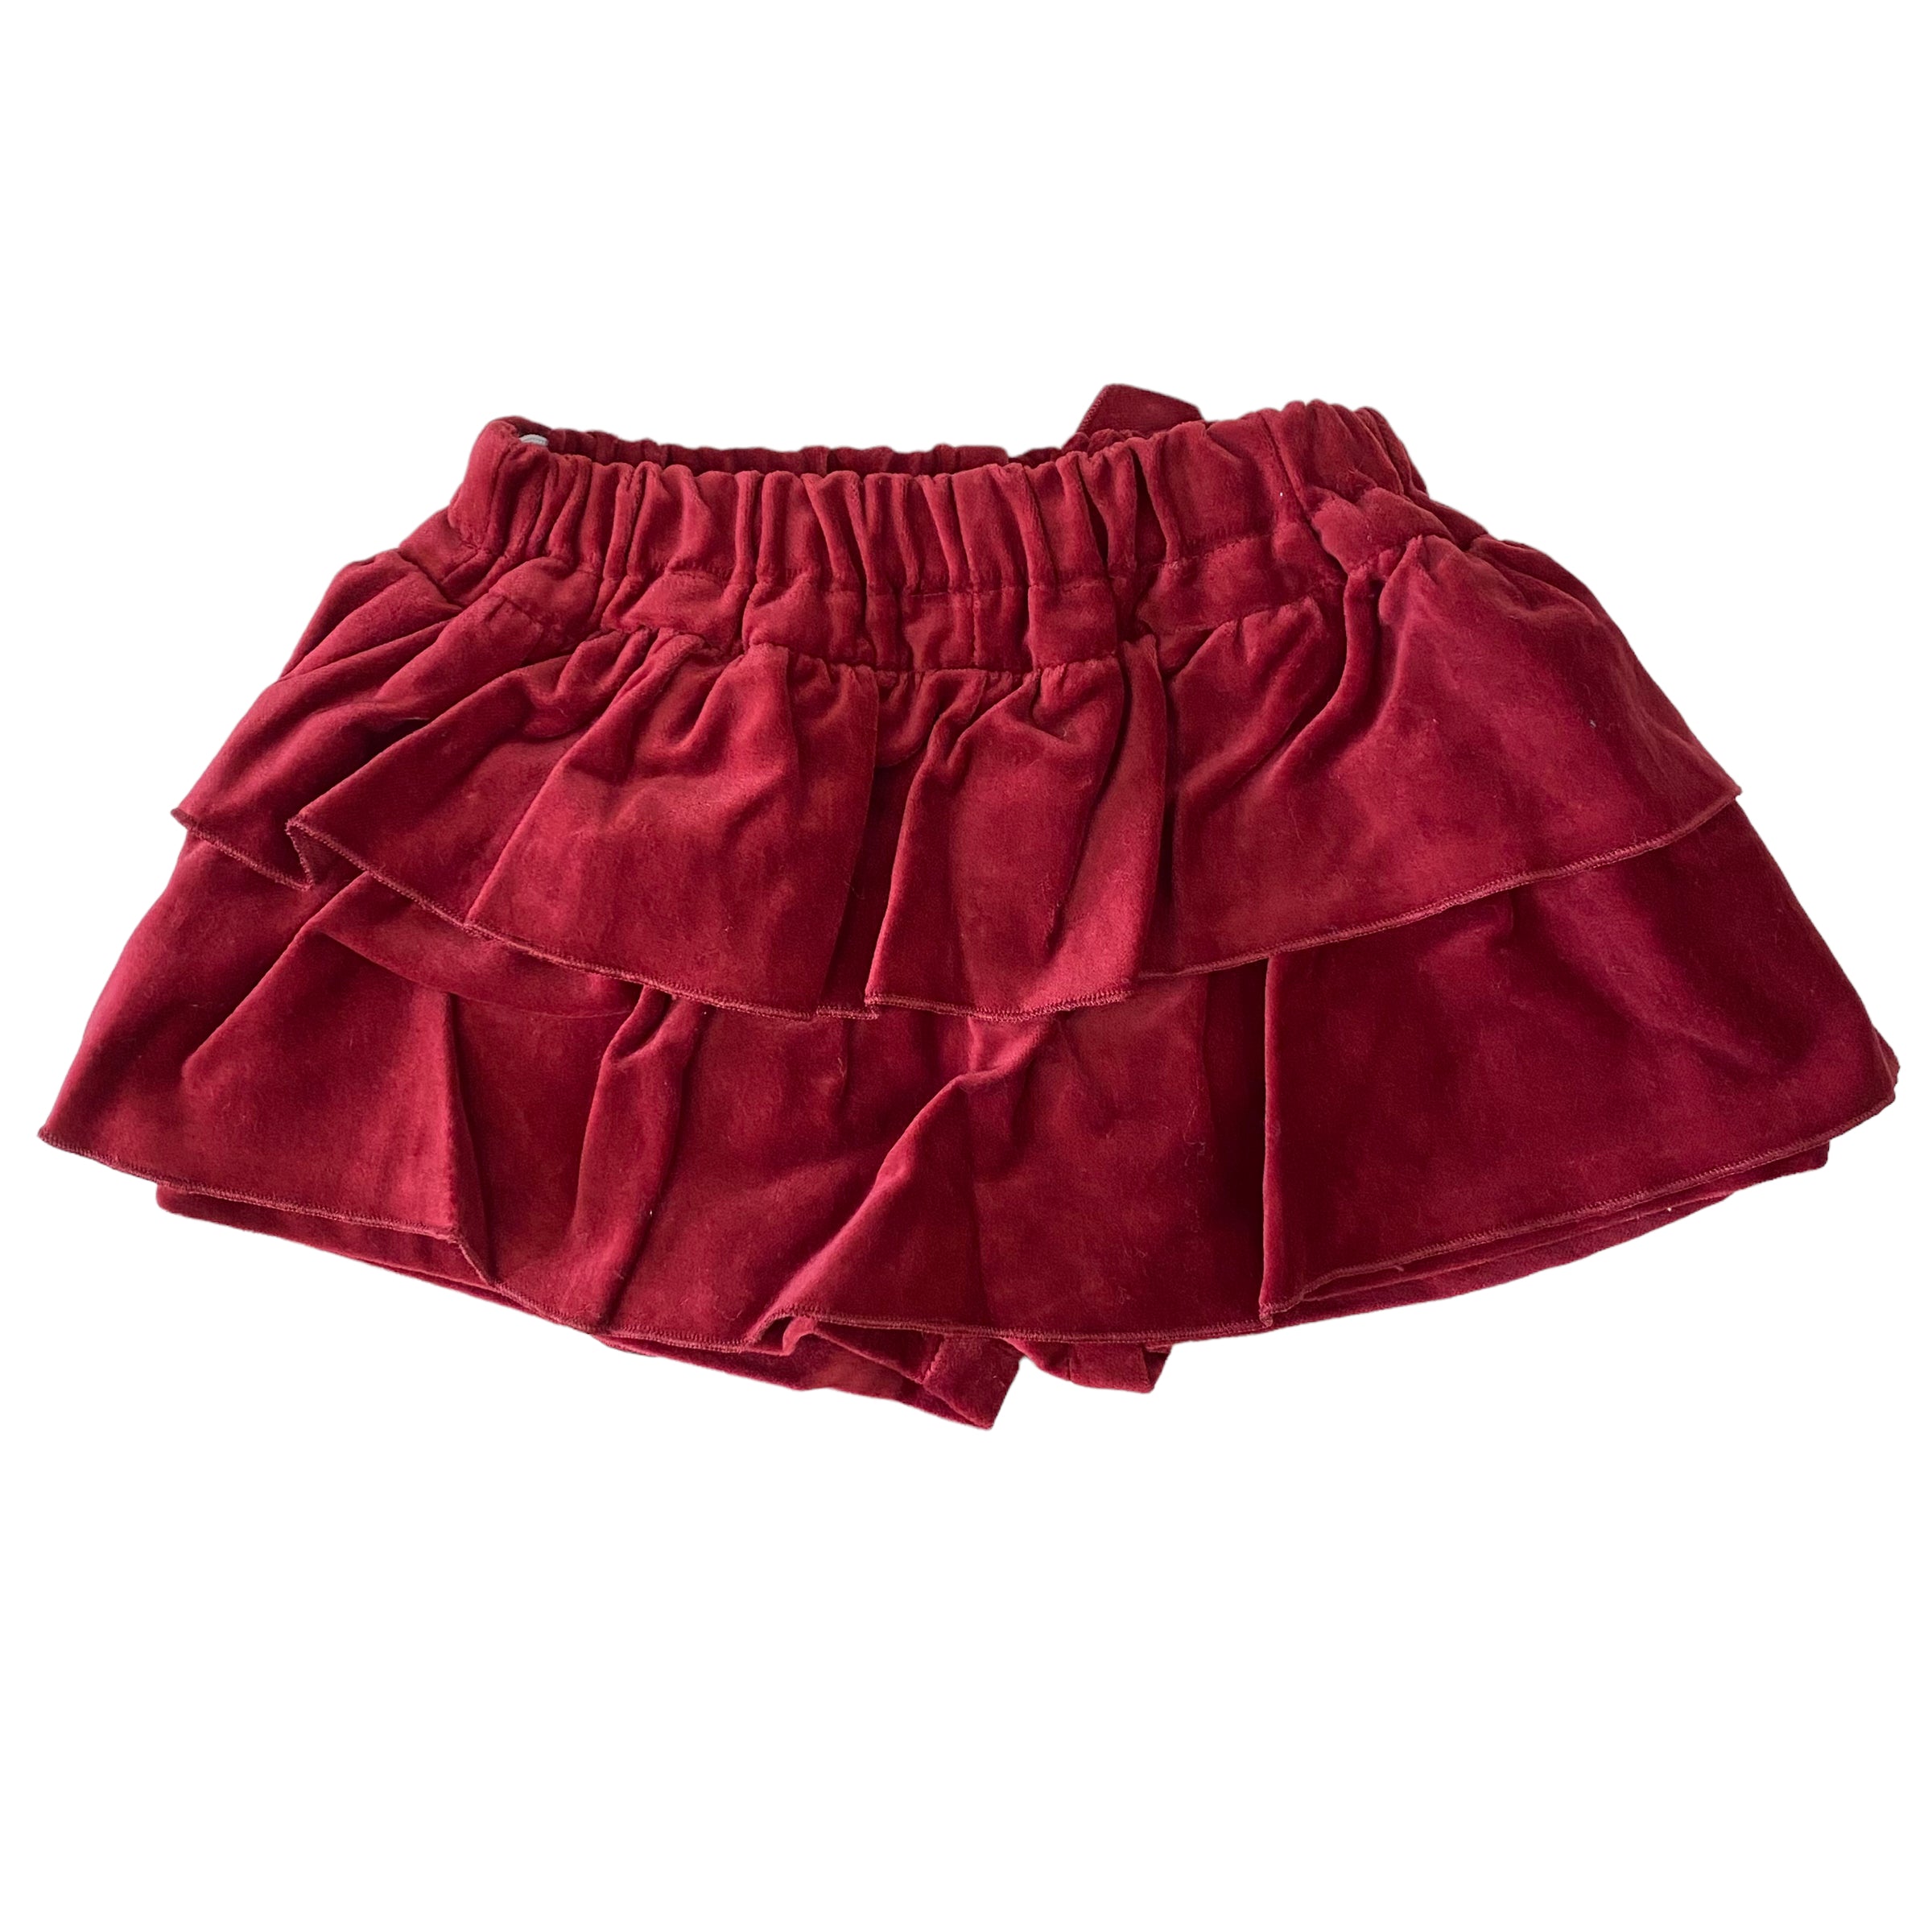 Pantaloncino Gonnellina In Velluto Neonata Bordeaux Phi Clothing 21560 - PHY CLOTHING - LuxuryKids